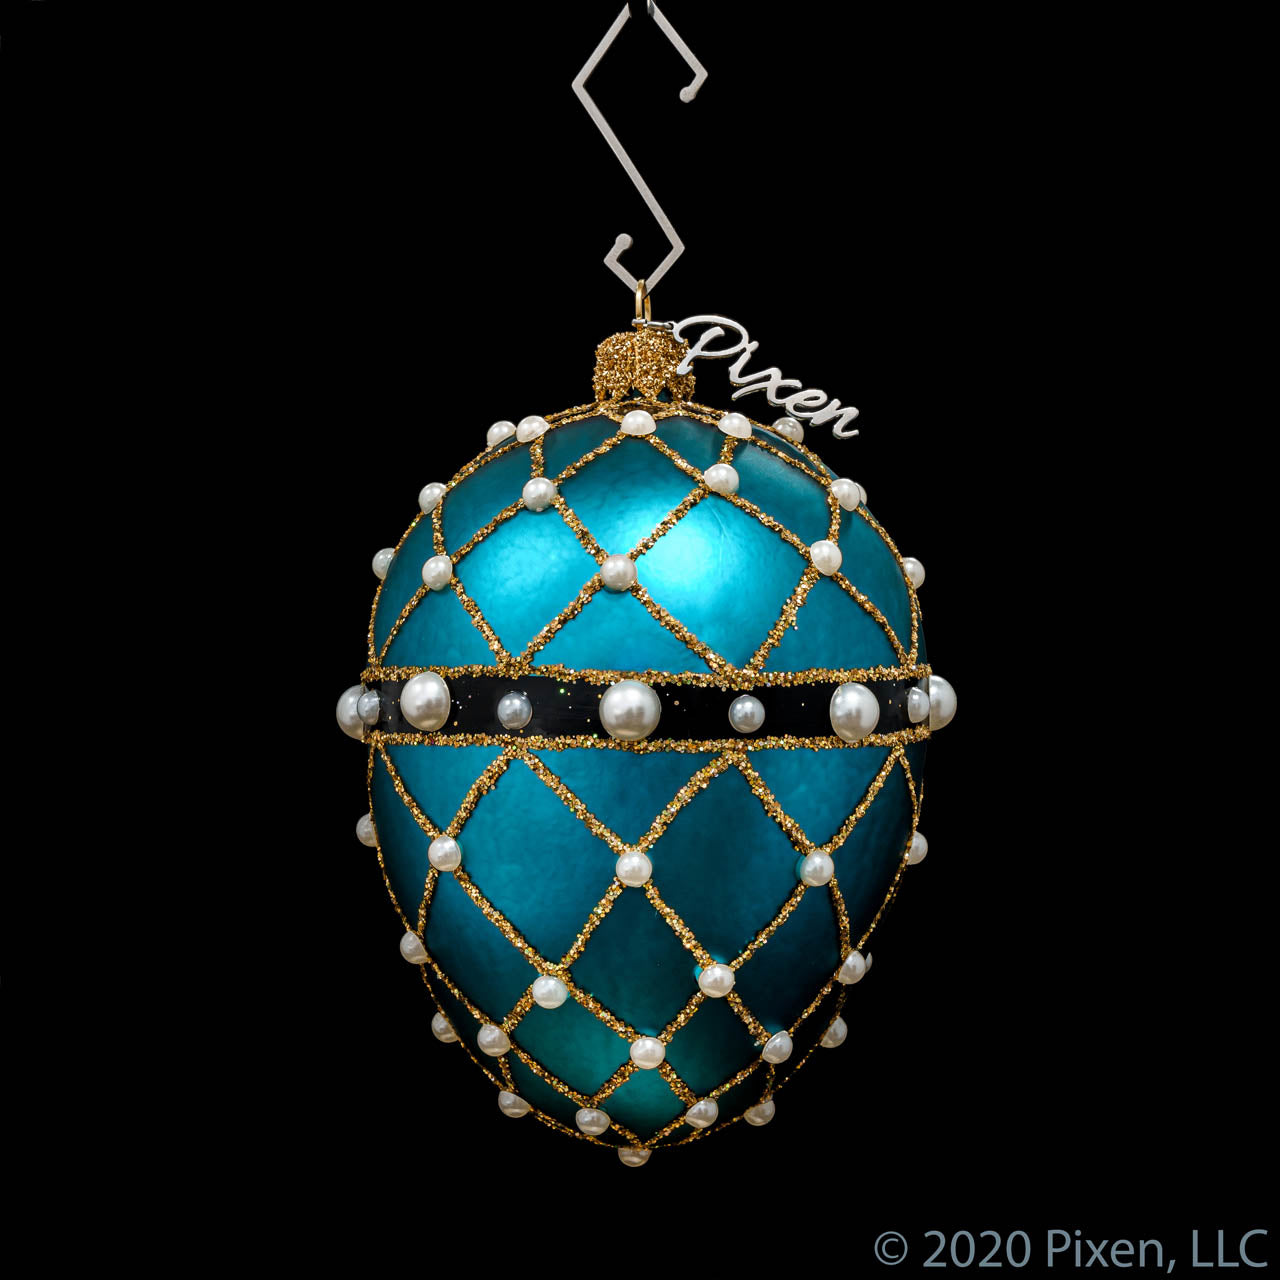 Reverie Glass Christmas Ornament in Turquoise